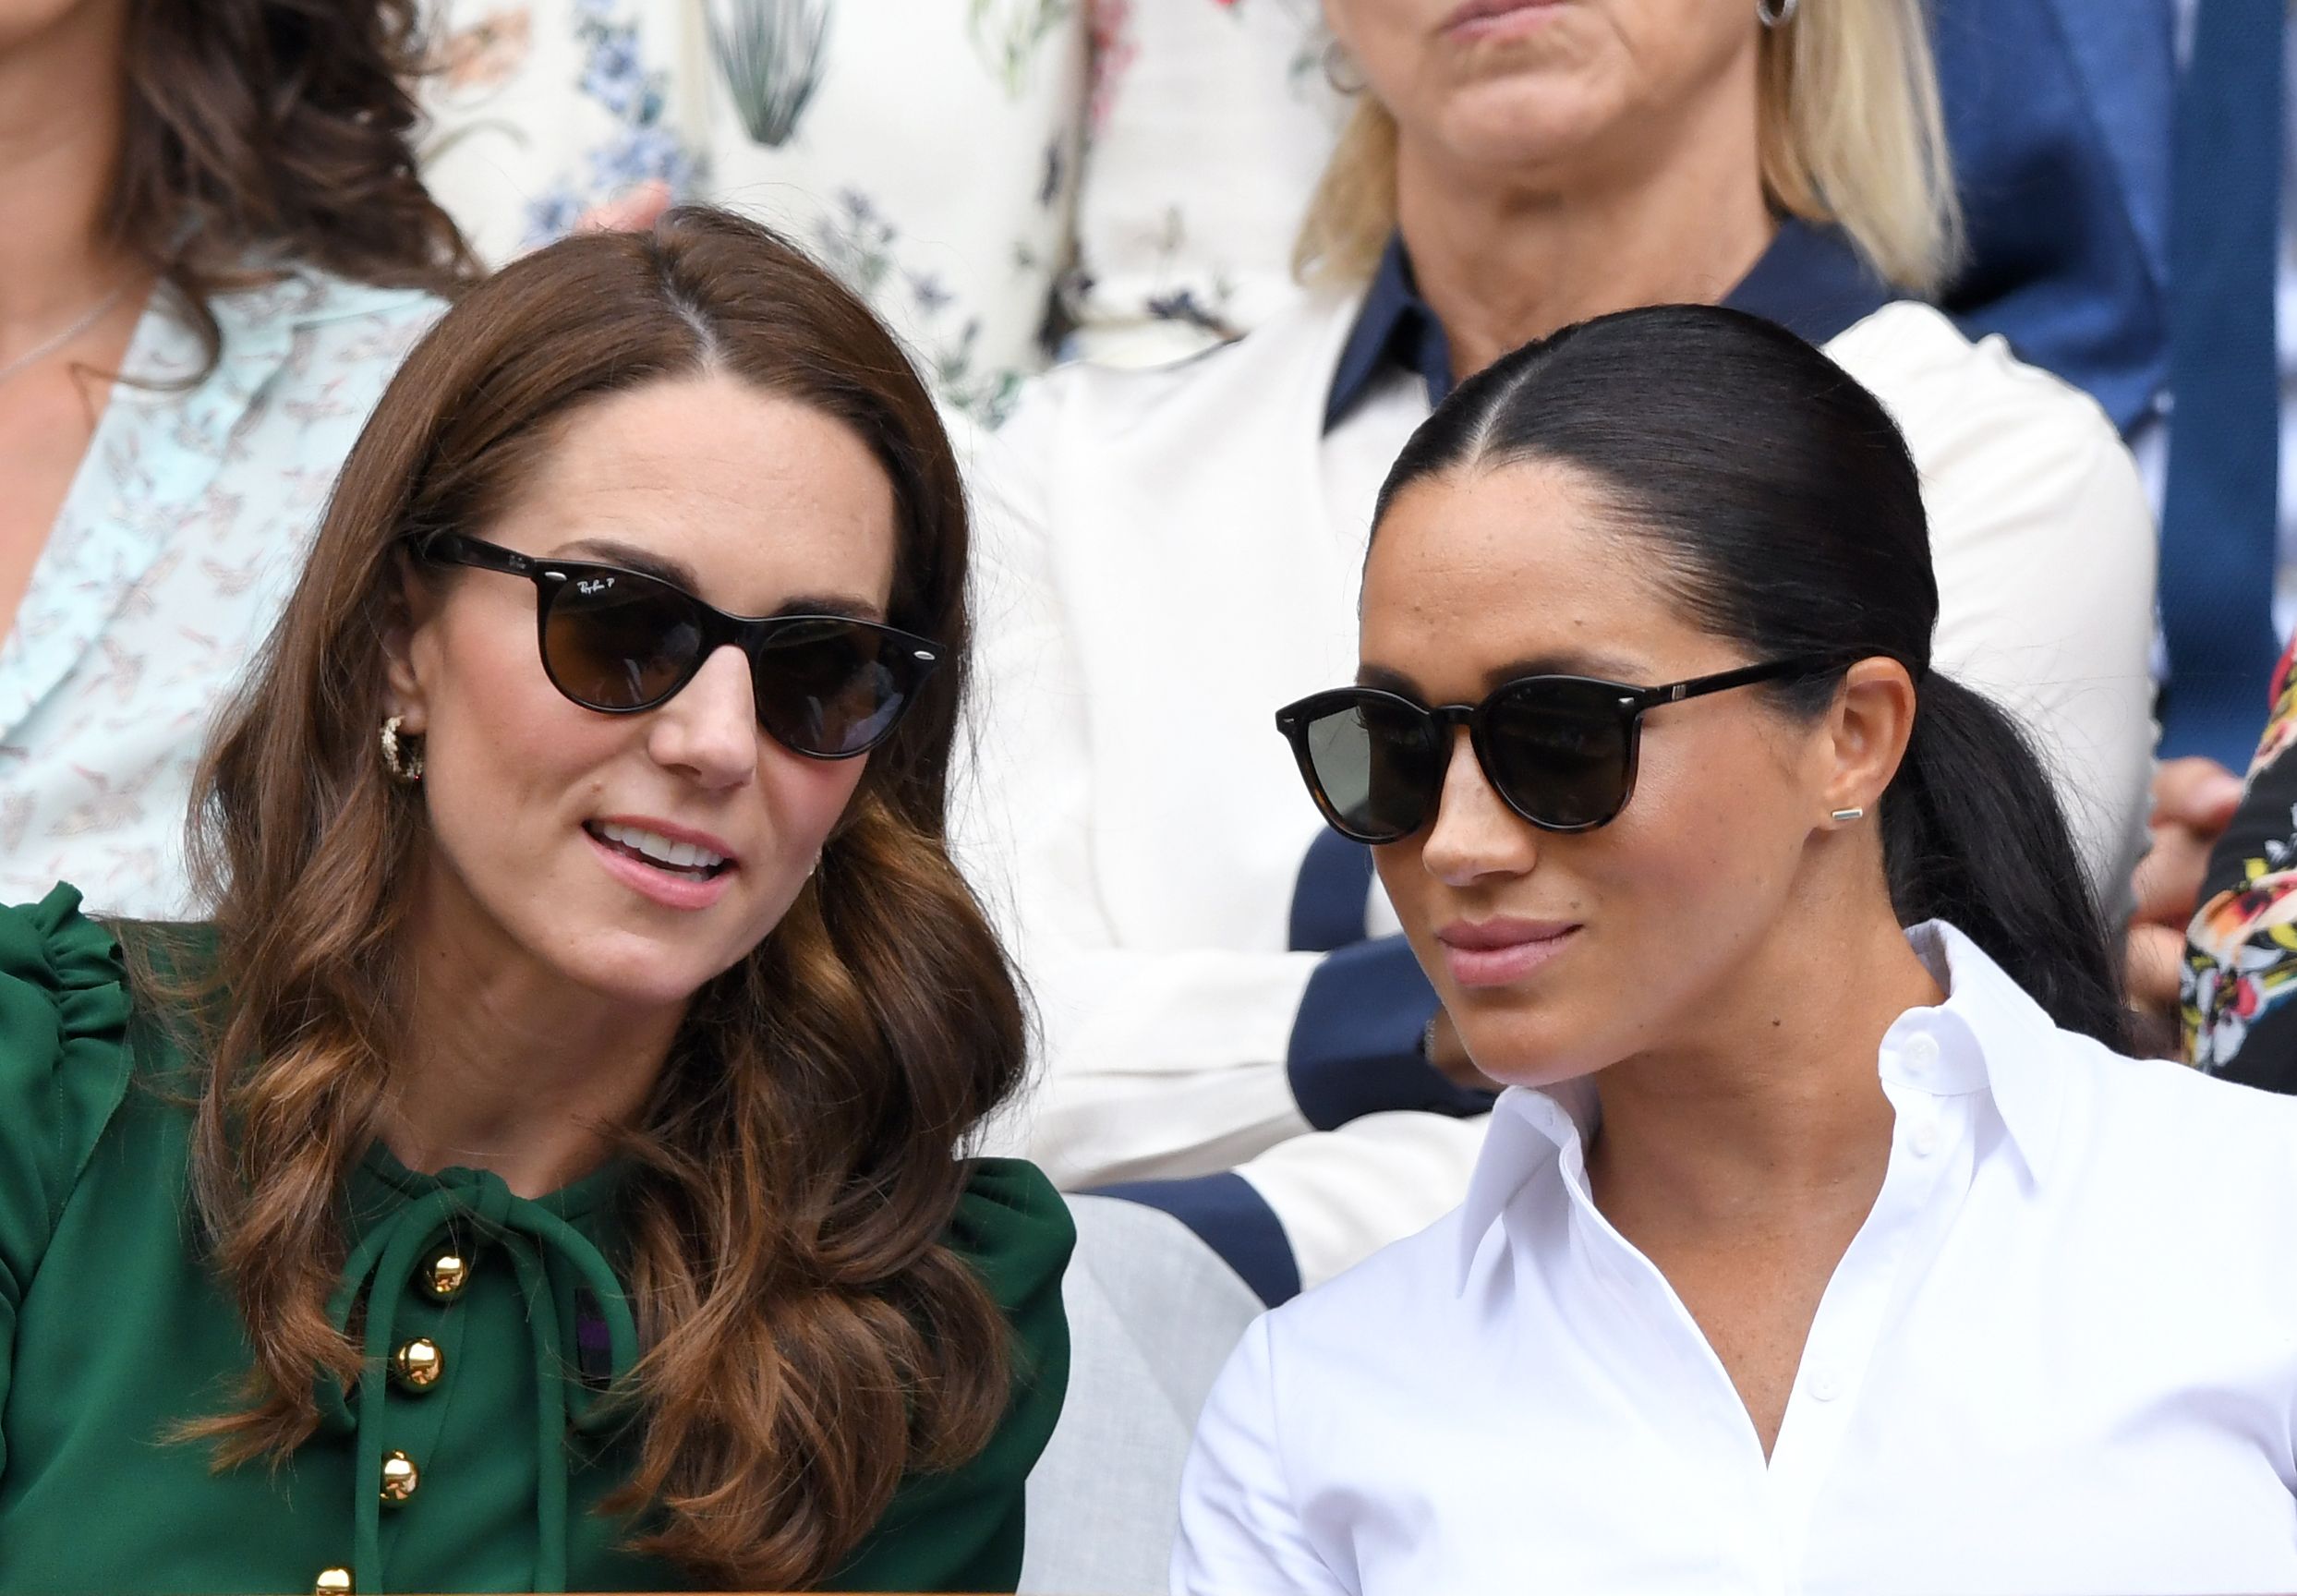 Kate Middleton and Meghan Markle in the Royal Box on Centre Court during day twelve of the Wimbledon Tennis Championships at All England Lawn Tennis and Croquet Club on July 13, 2019 | Photo: Getty Images